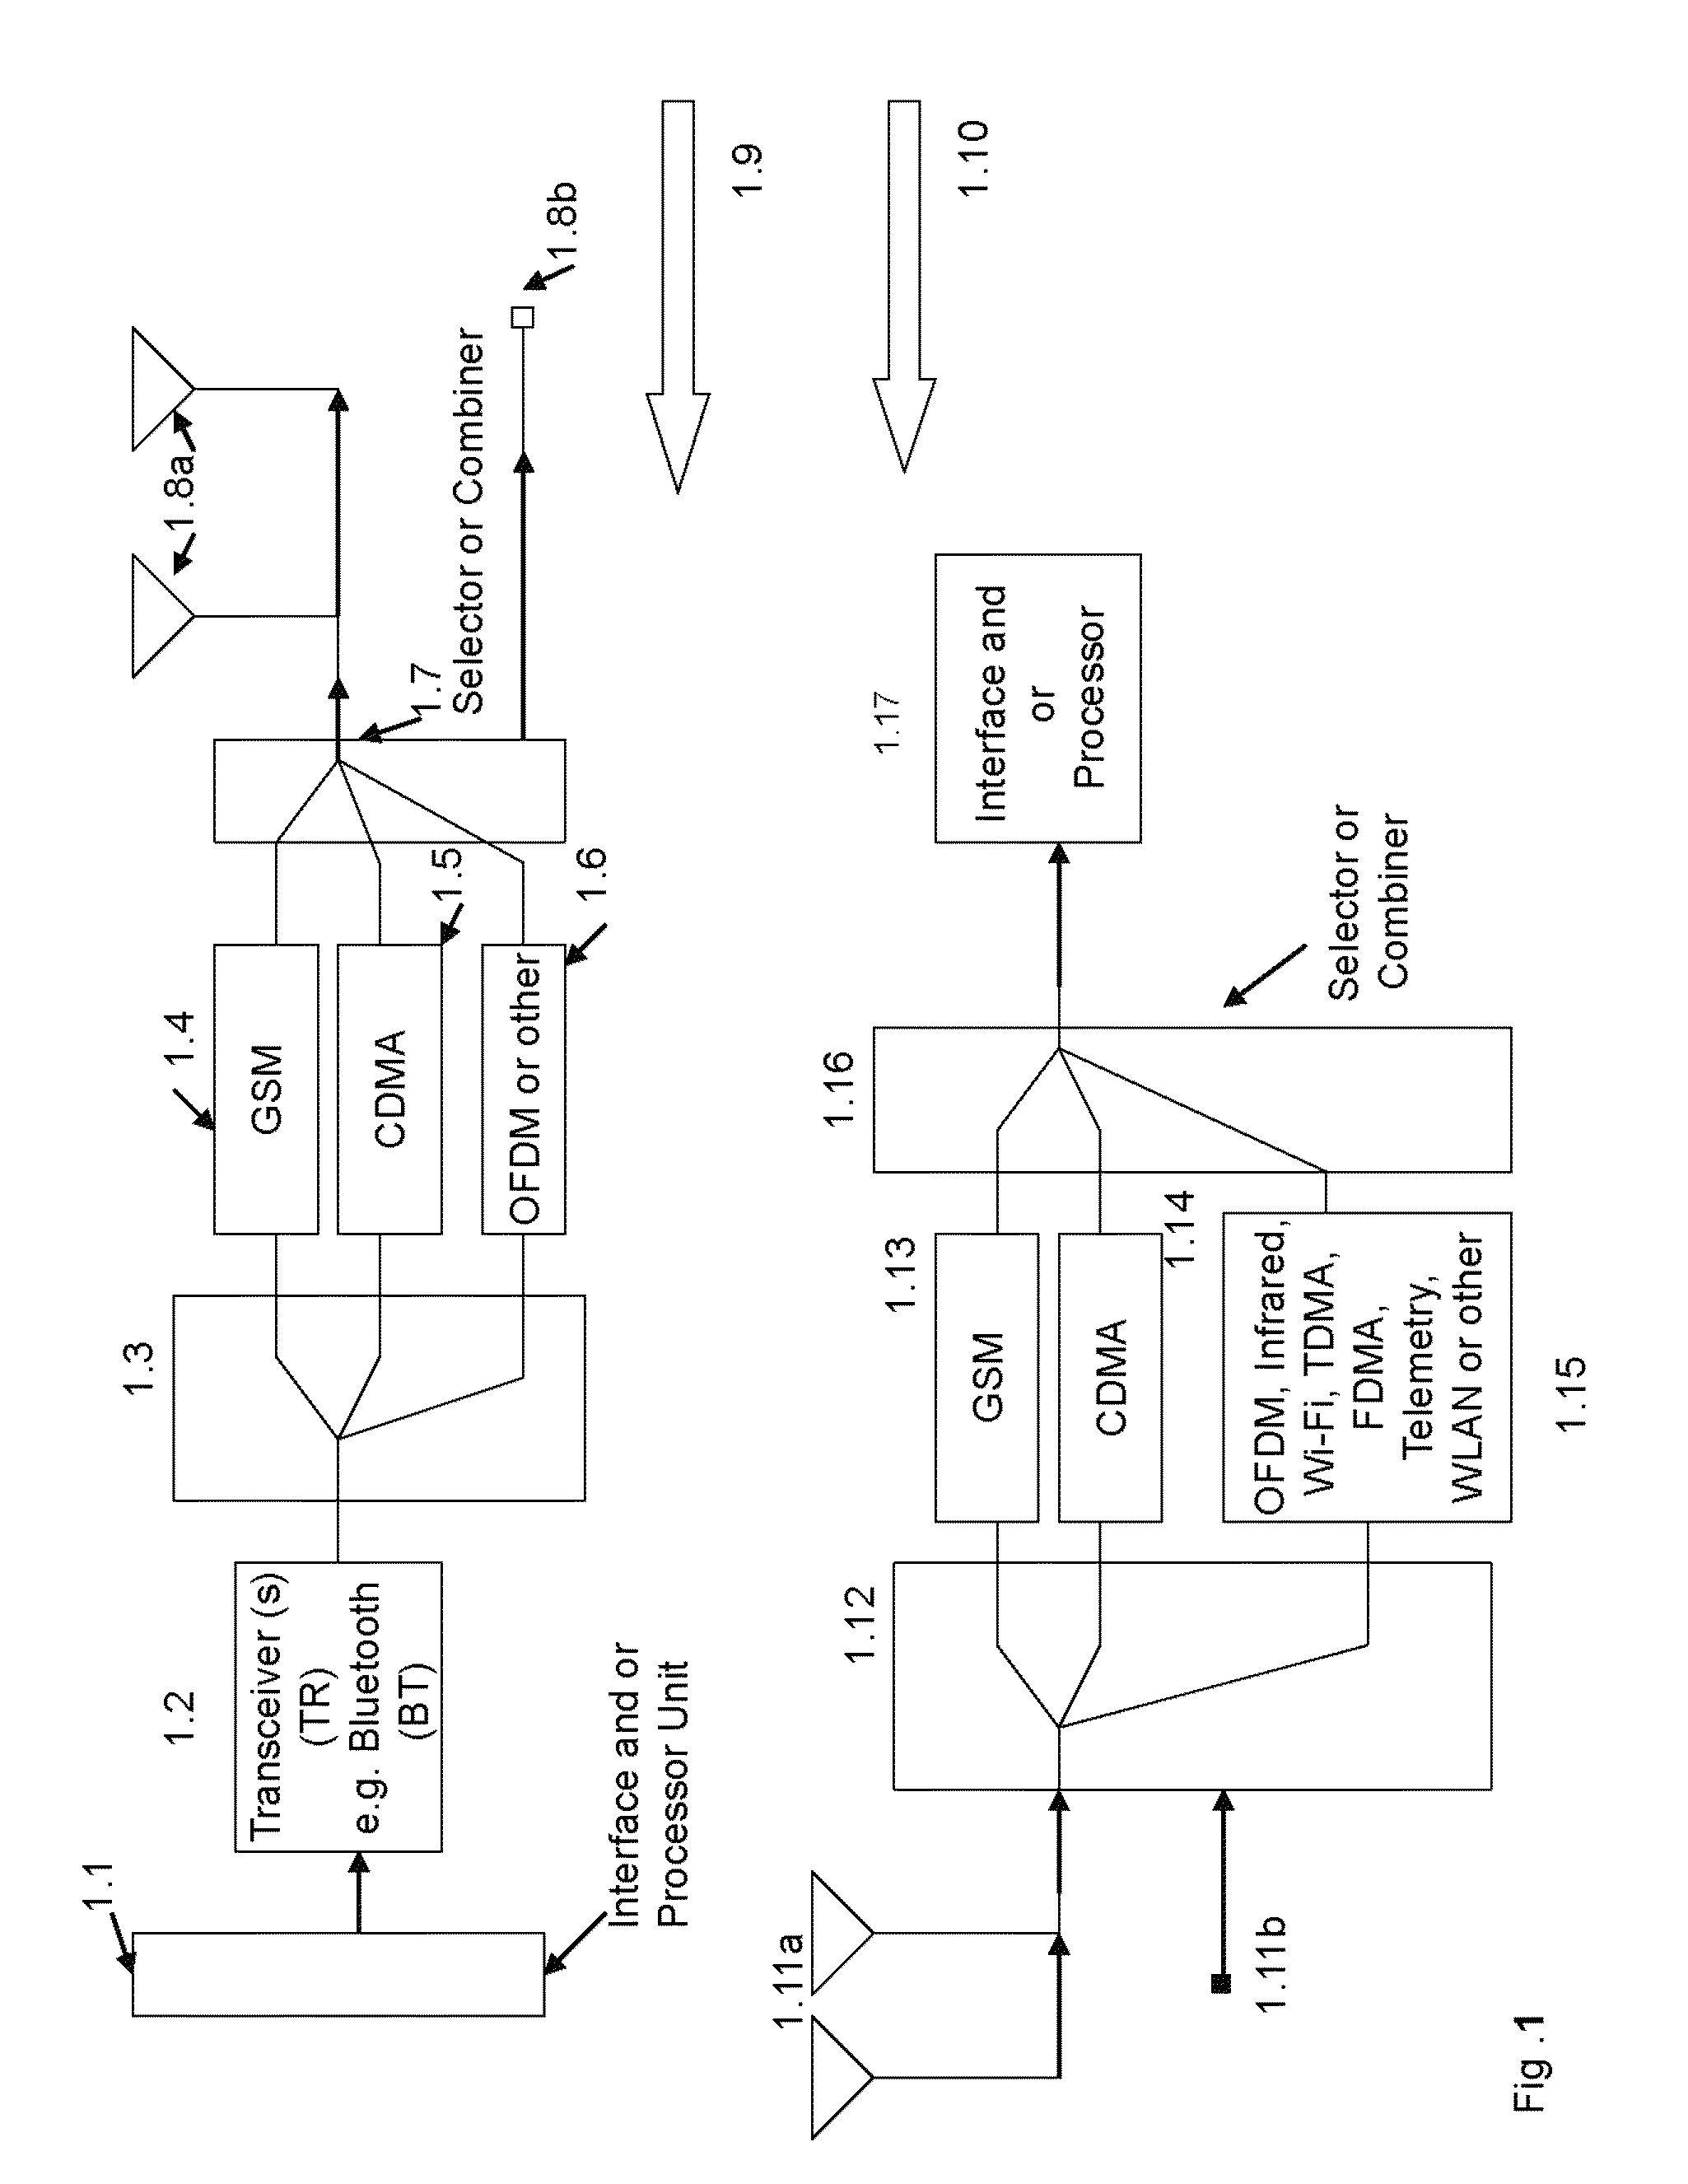 Base station devices and automobile wireless communication systems